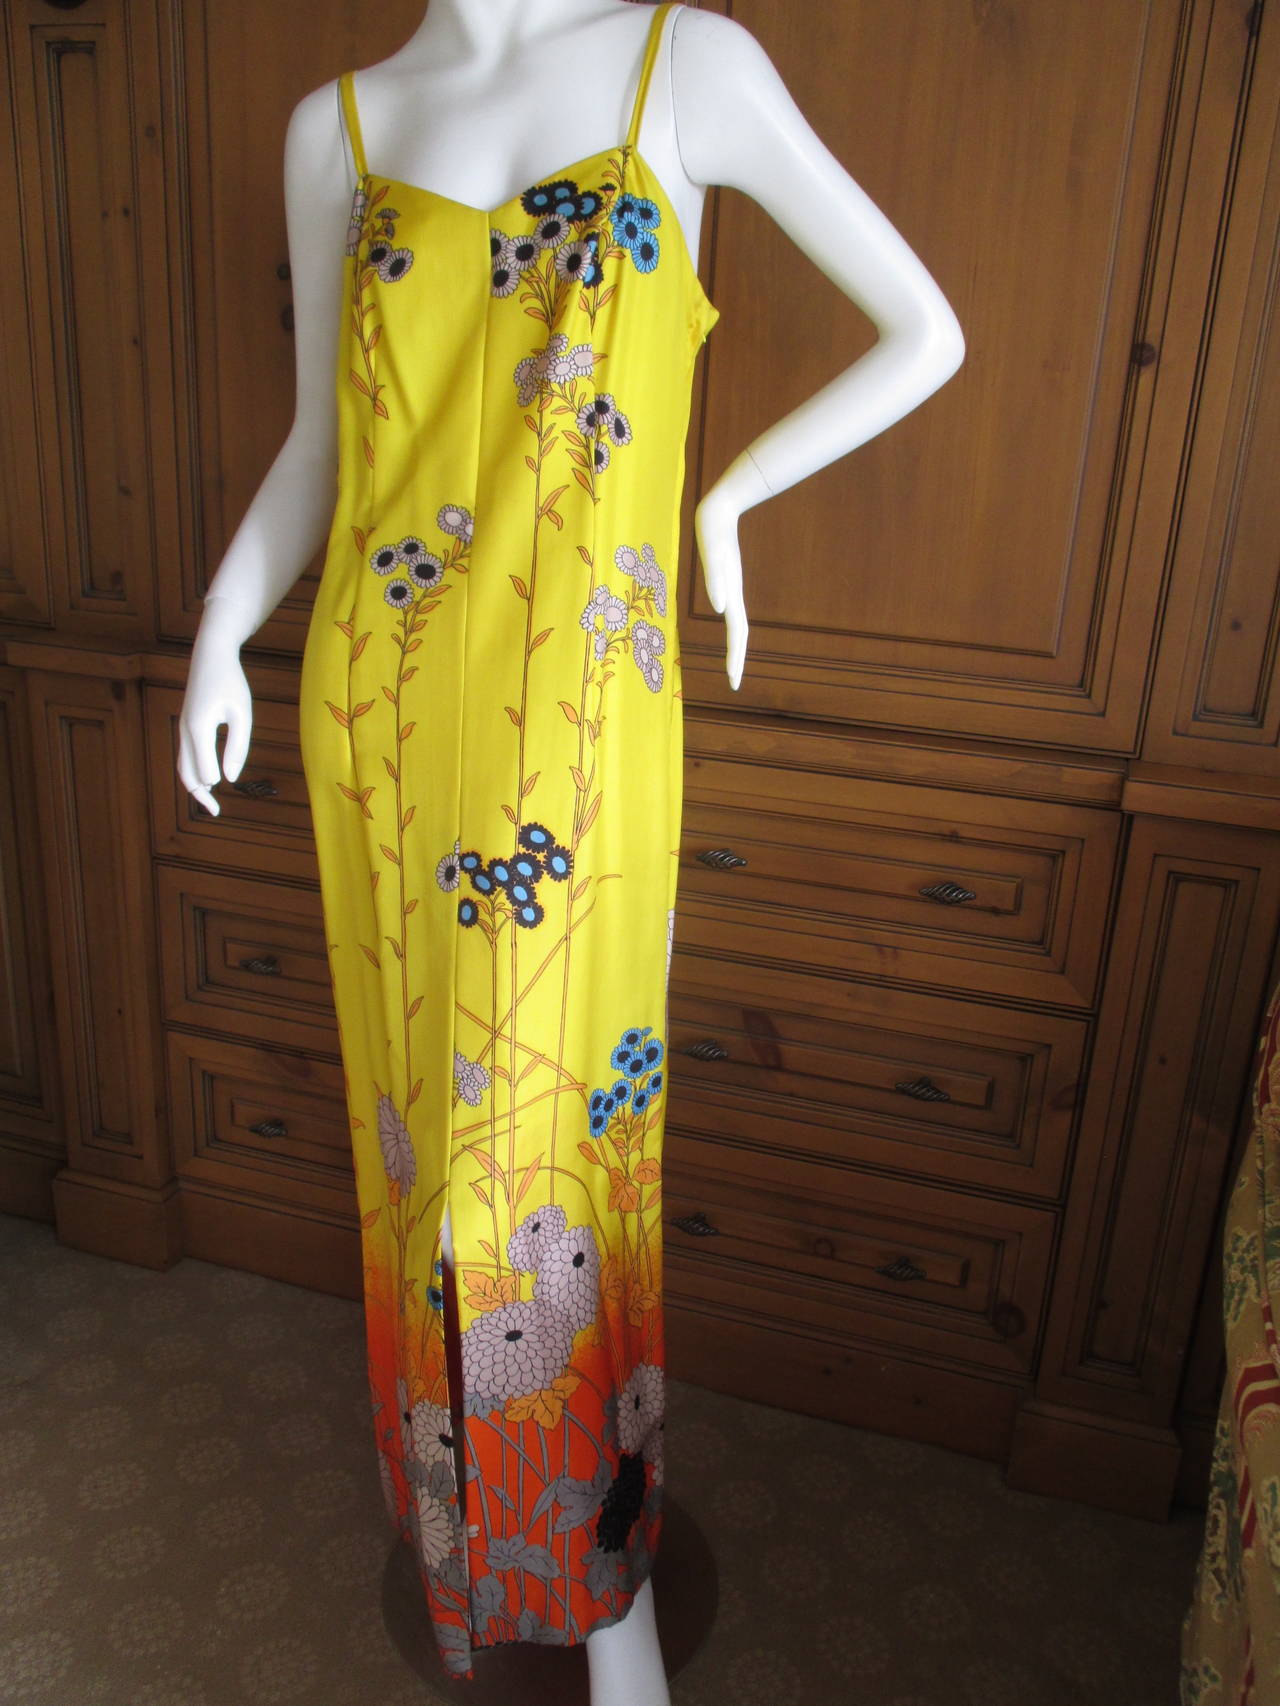 Hanae Mori Yellow Silk Dress & Caftan.
Featuring a yellow sleeveless dress with a matching sheer bell sleeve caftan coat.

Hane Mori opened her fashion house in 1951 and is the first Asian woman to be admitted as an official haute couture design